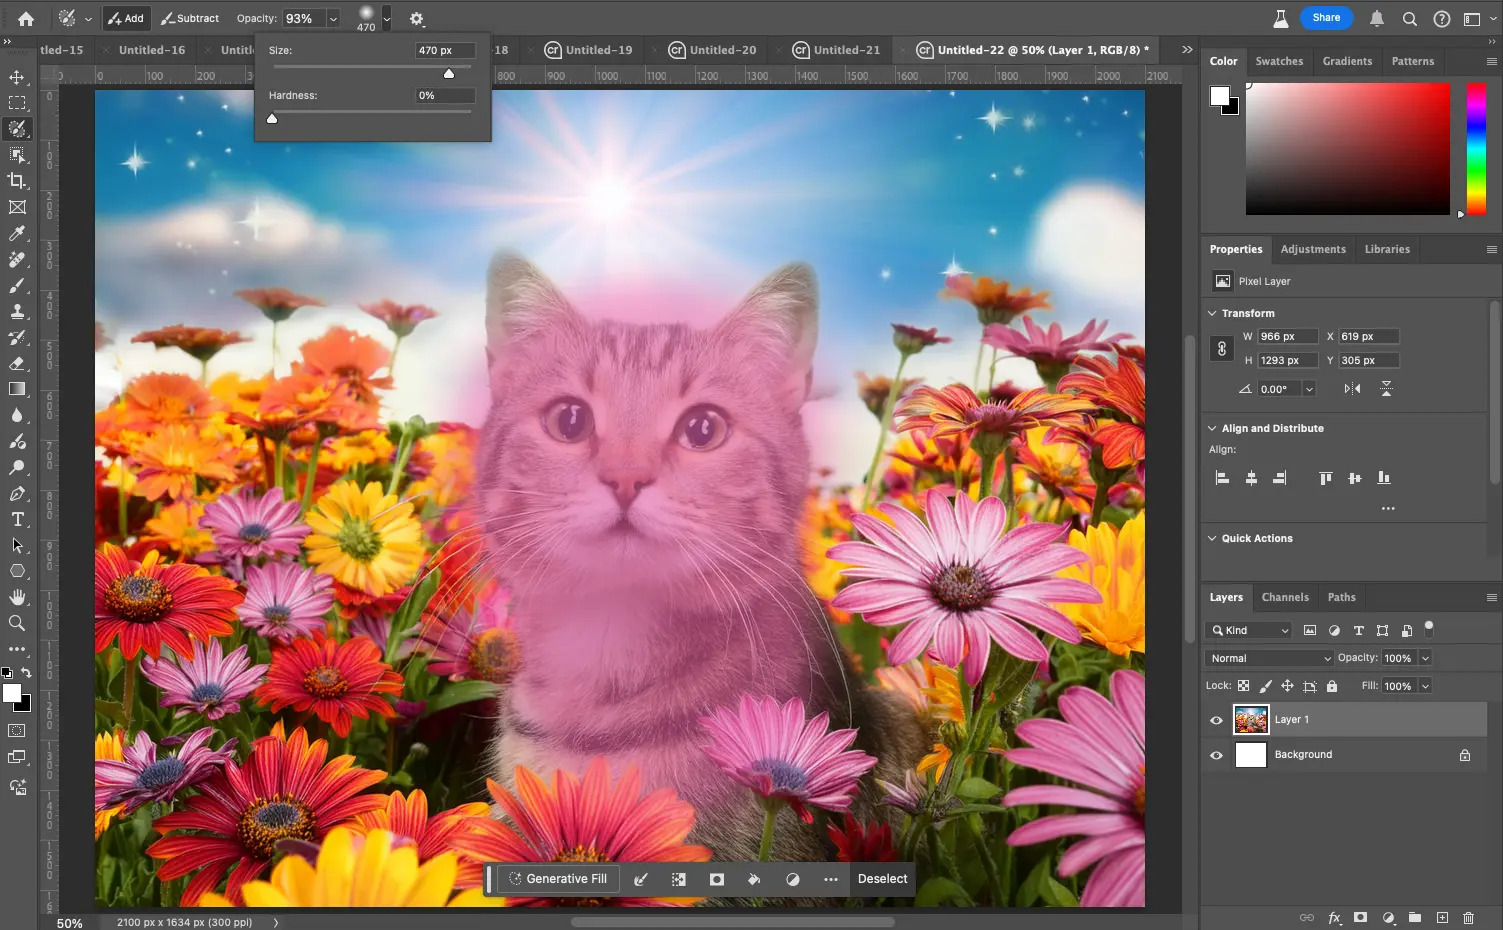 A screenshot showing use of the new Photoshop Selection Brush Tool